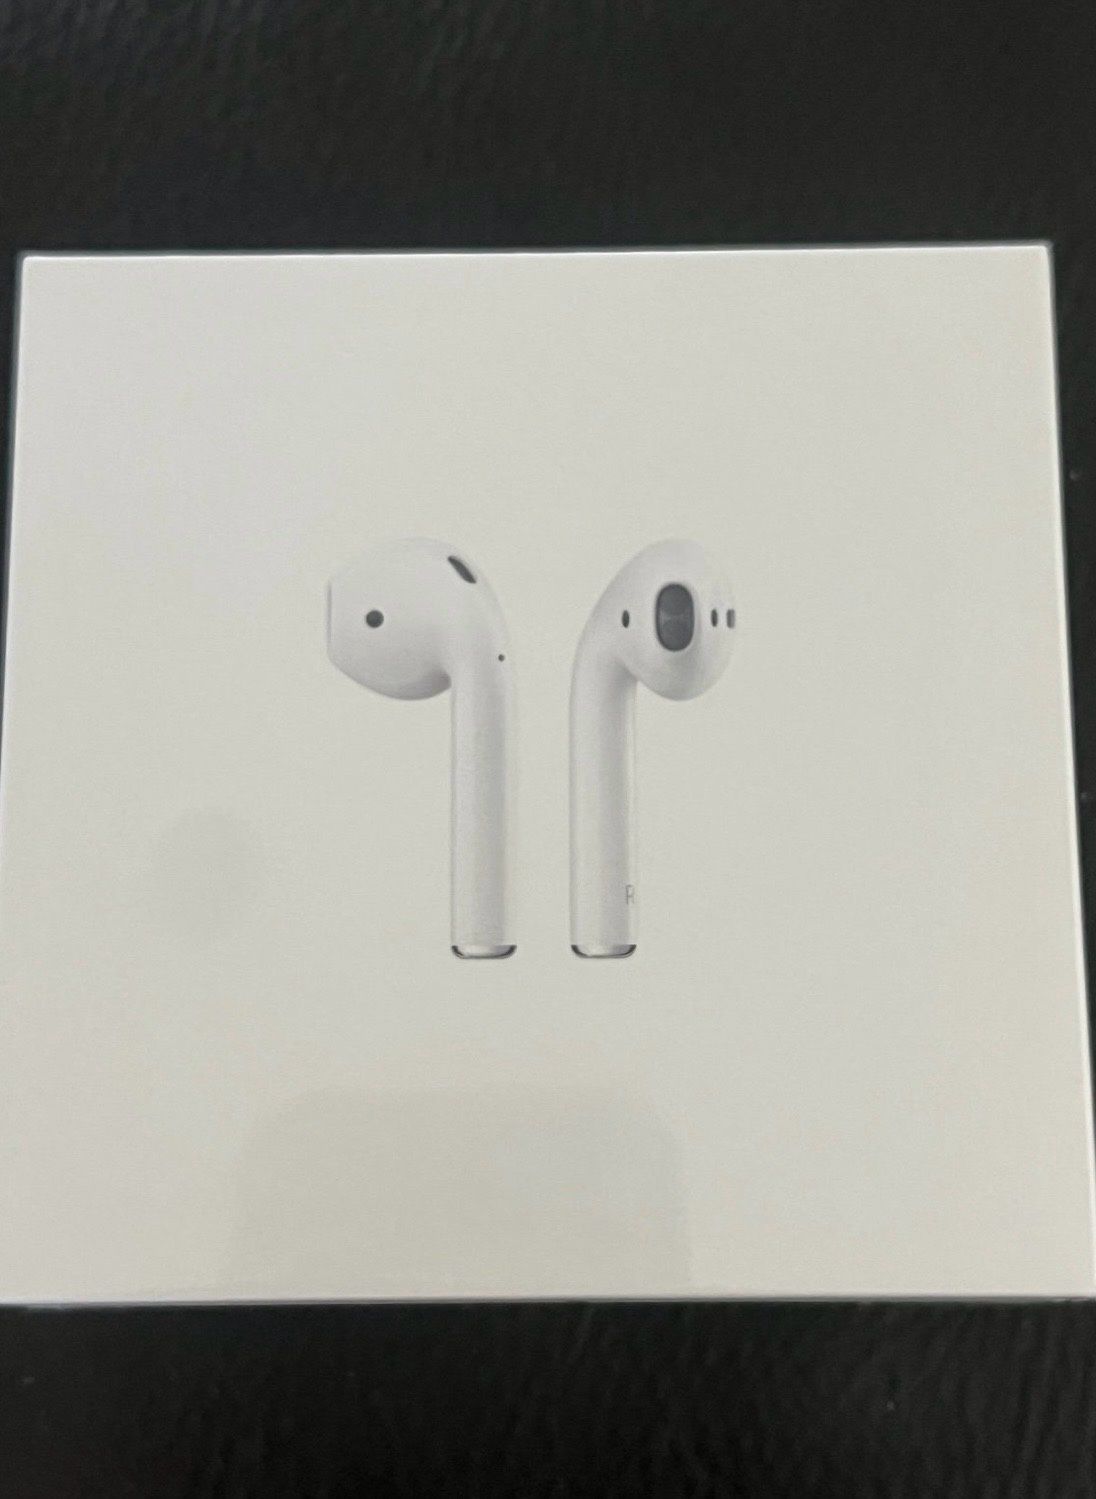 Apple AirPods 2nd Generation with Charging Case in White